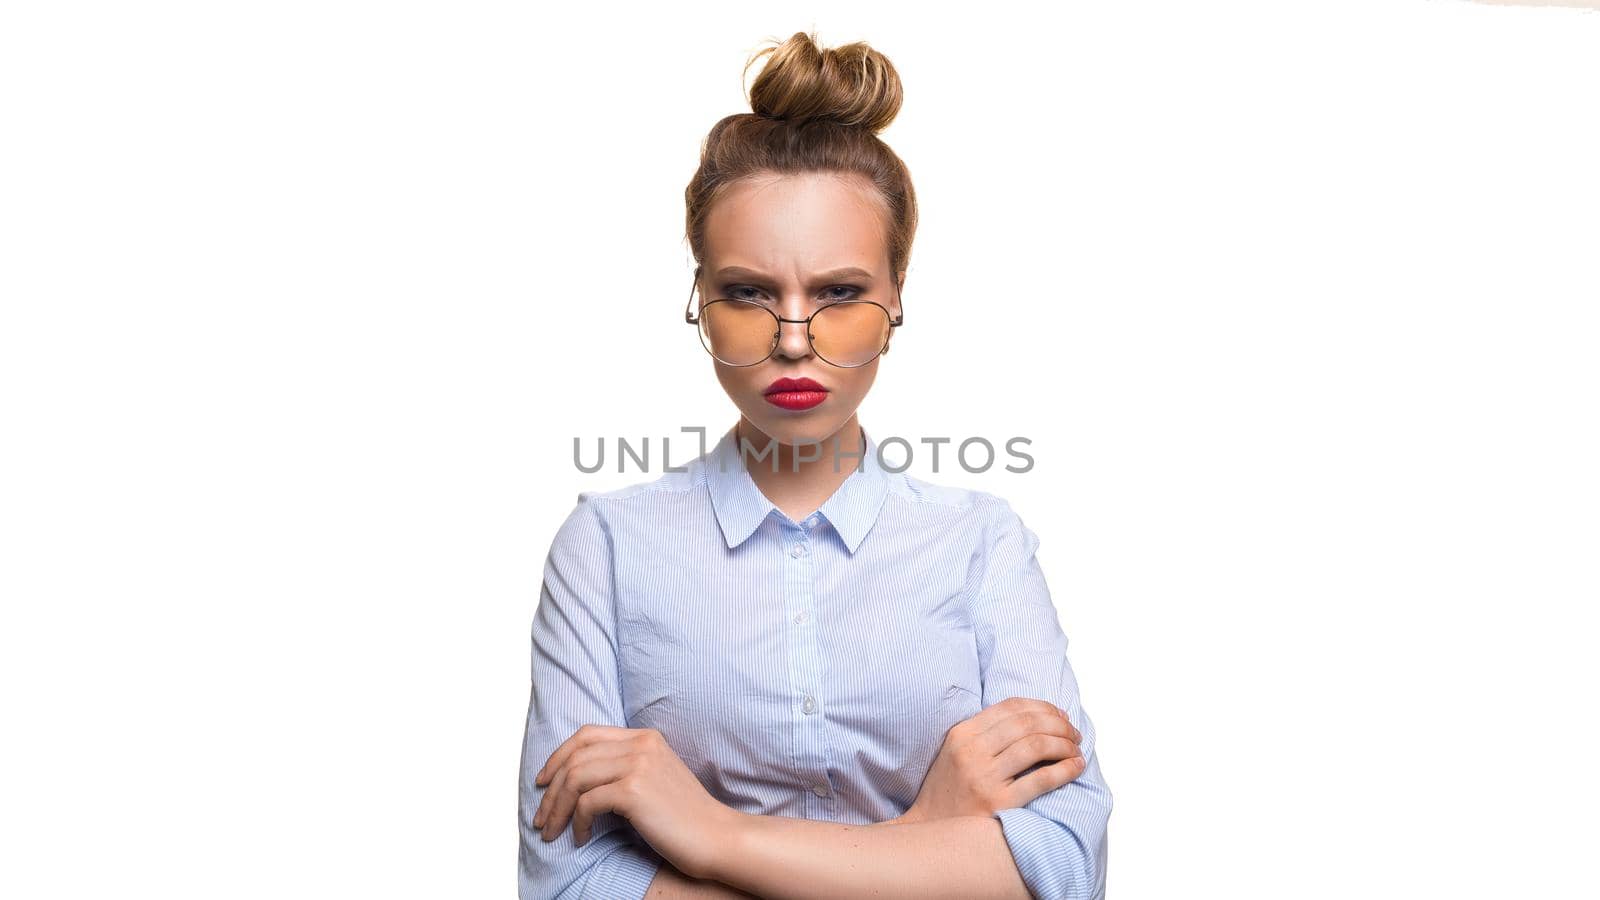 Dissatisfied girl with glasses looking at the camera. Isolated on a white background.